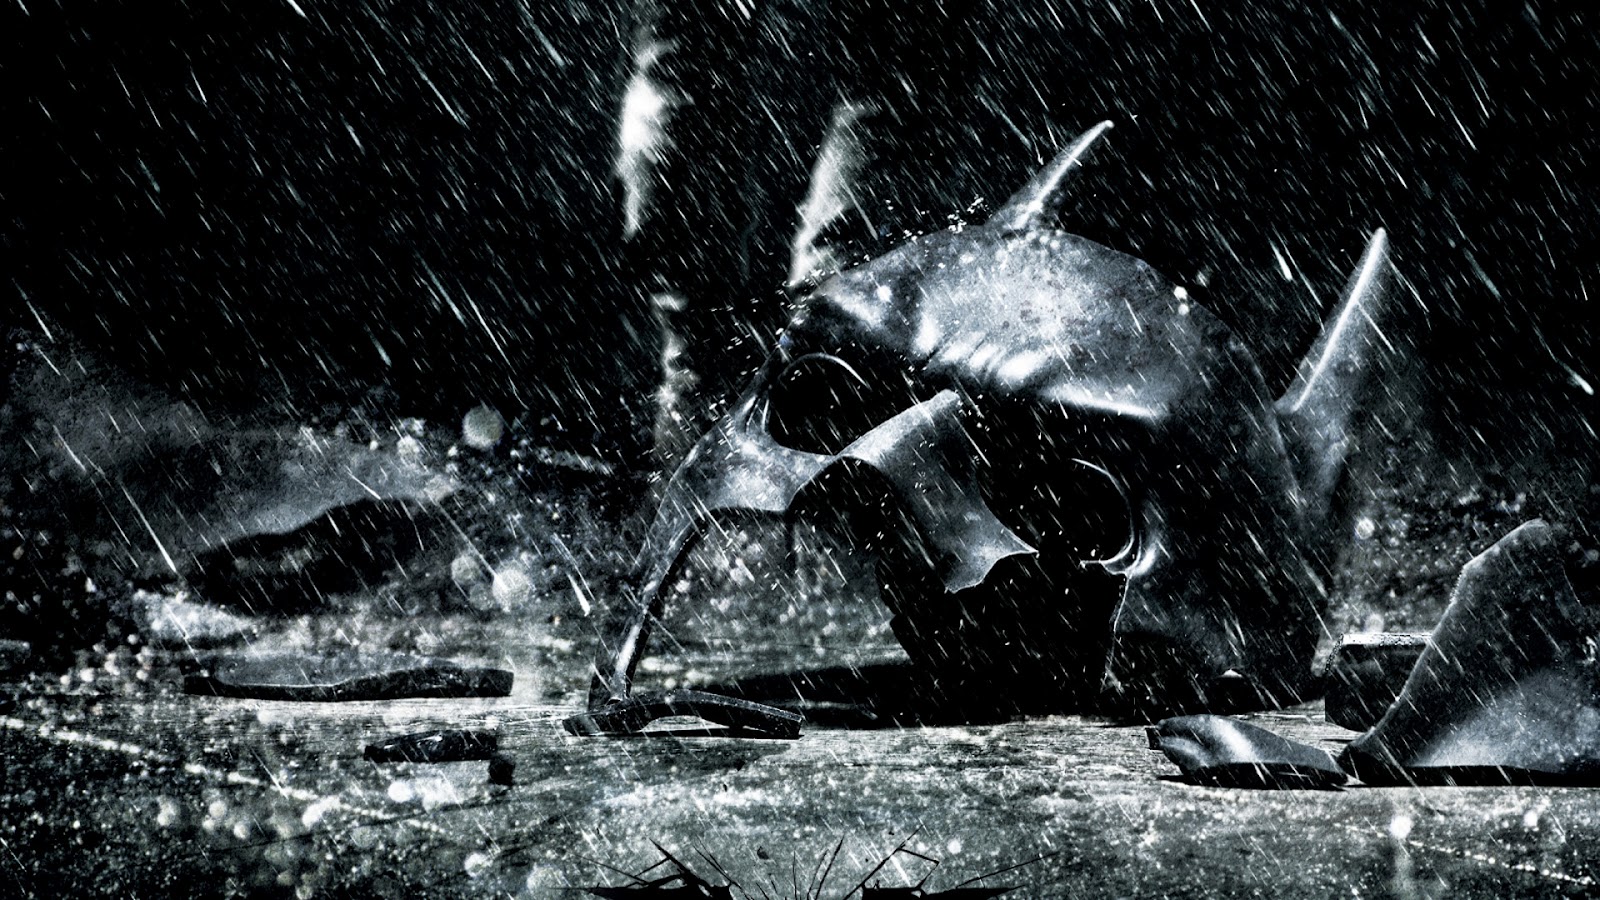 Follow This Link To The Dark Knight Rises Wallpaper